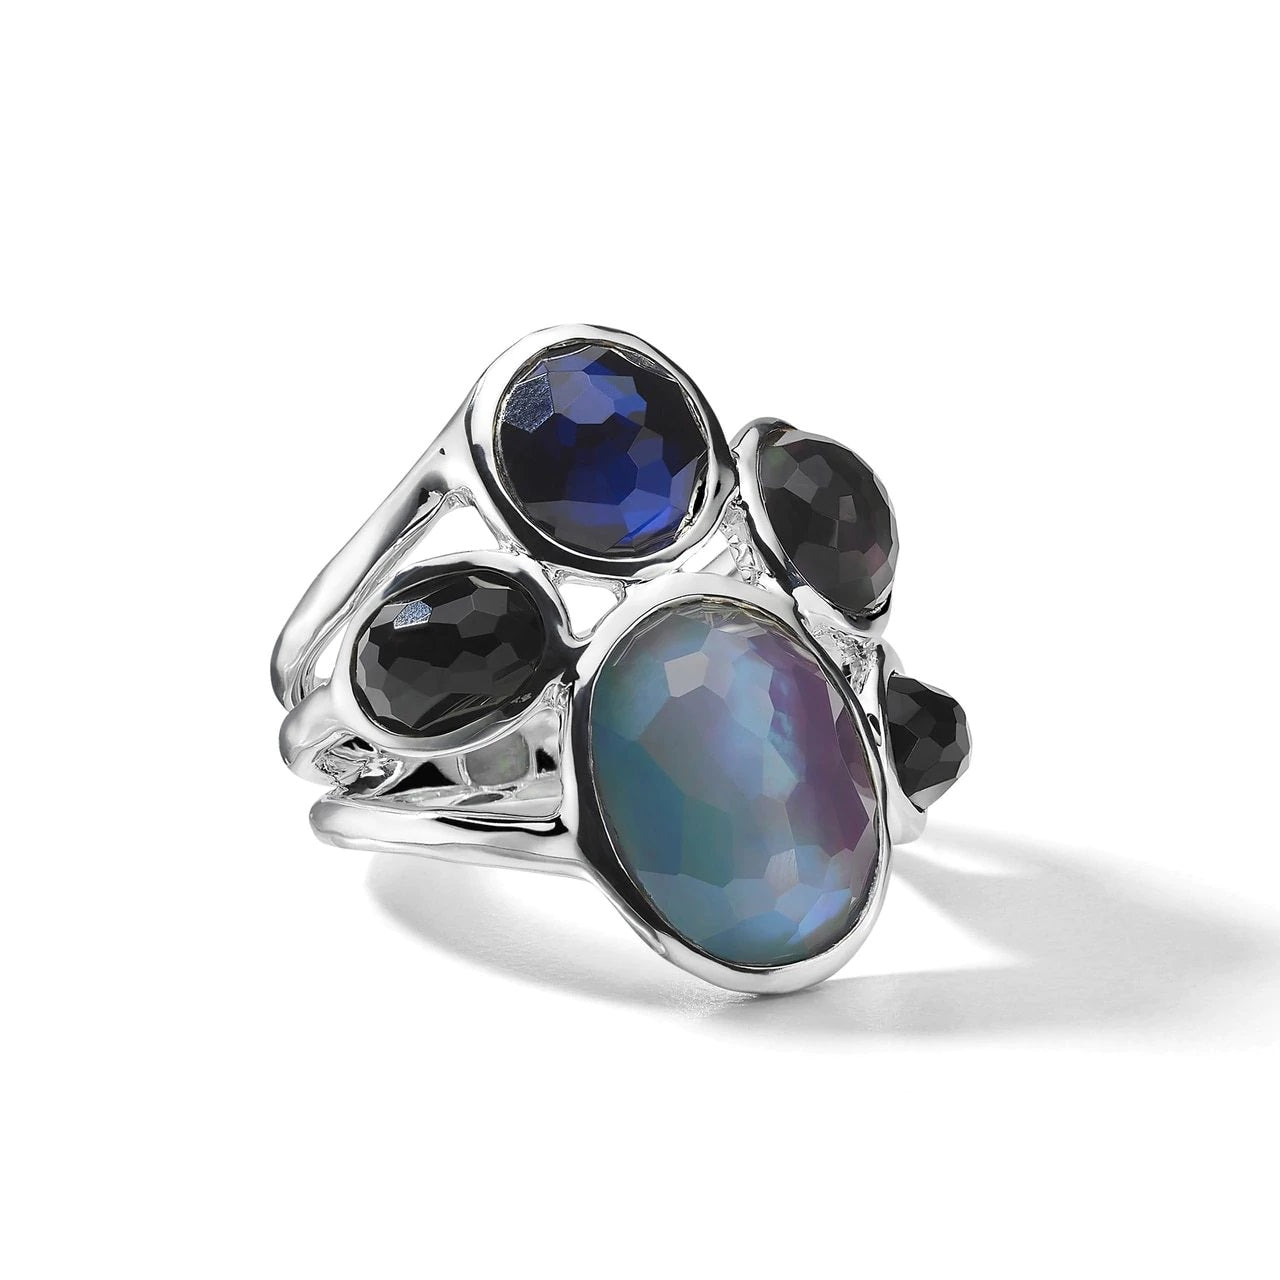 IPPOLITA Wonderland Sterling Silver Five Stone Ring in Astro Colorway